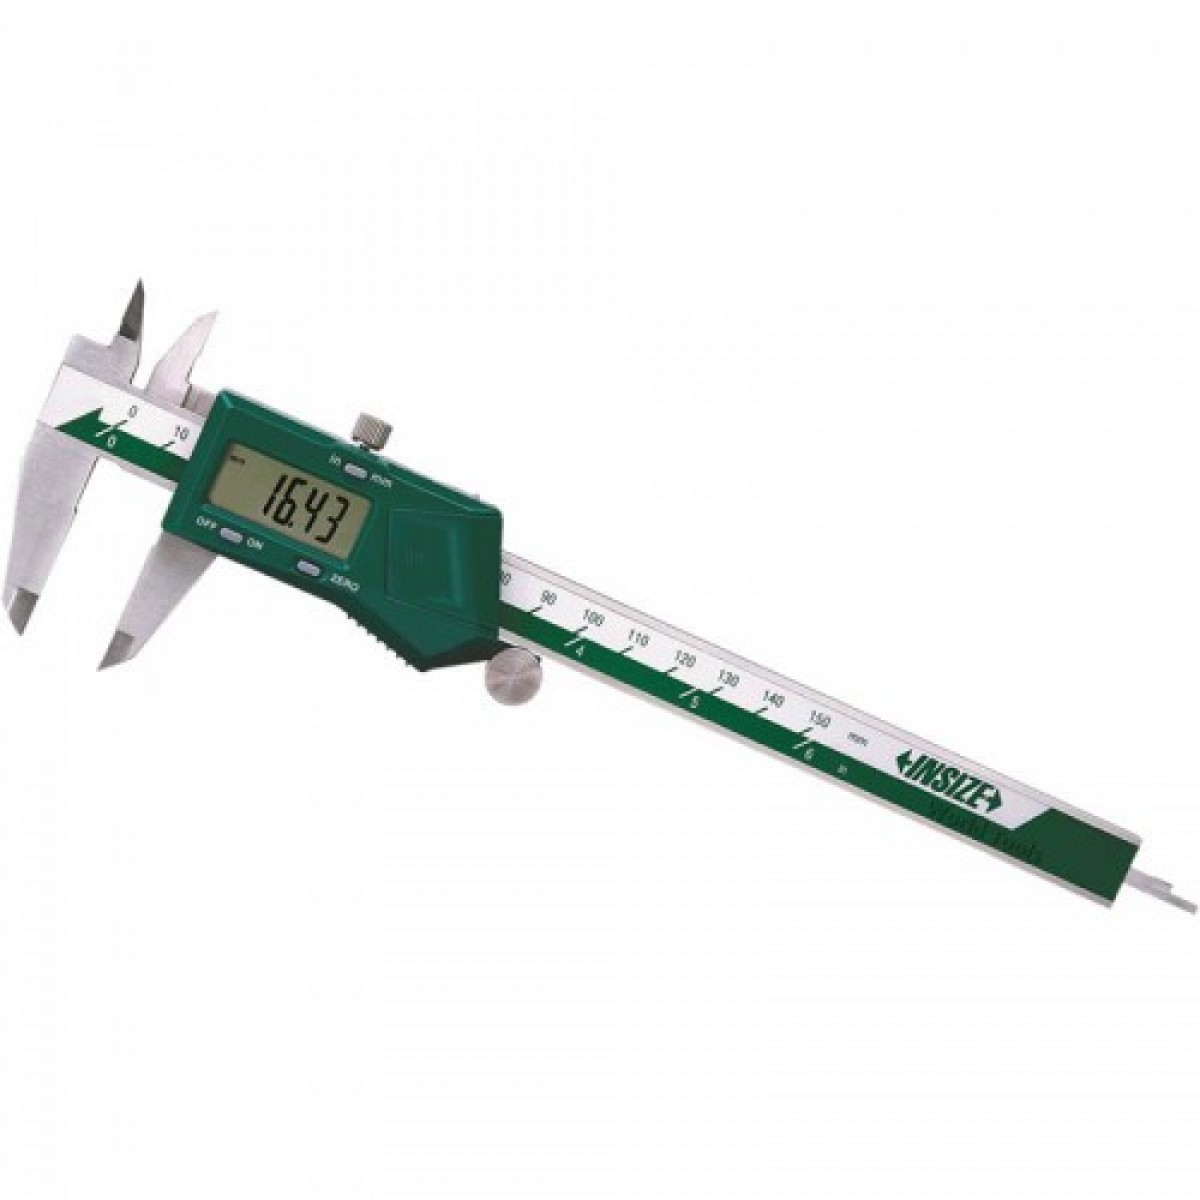 INSIZE 1108-200 ELECTRONIC CALIPER 200mm/8" - Click Image to Close